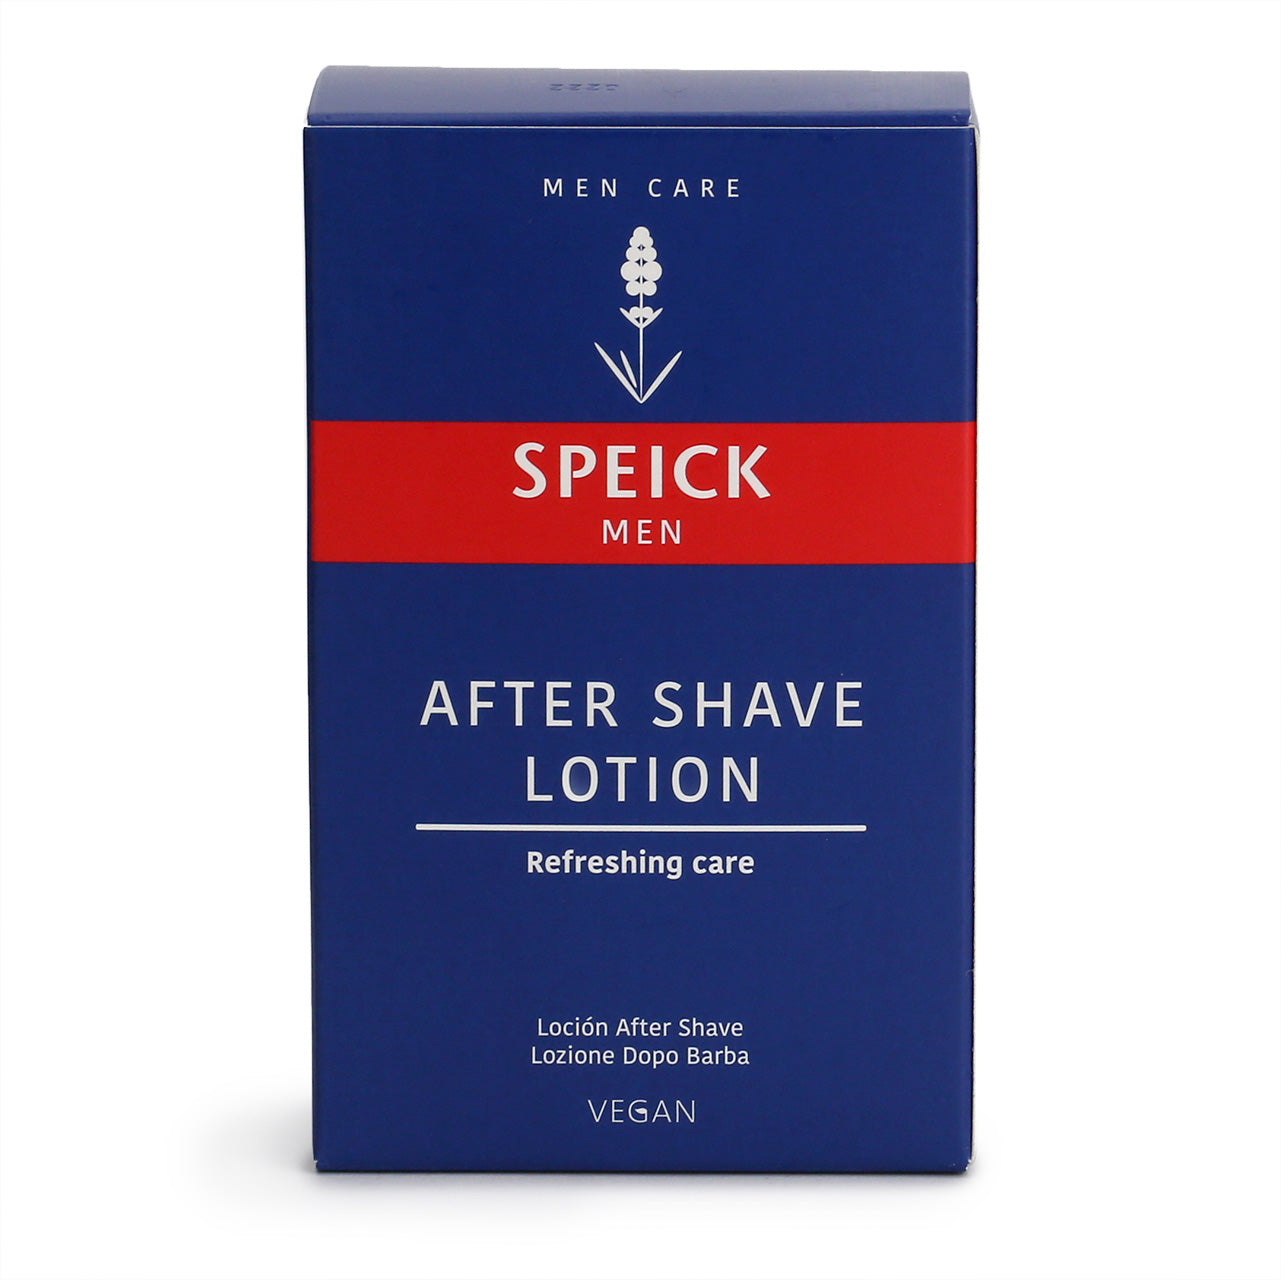 Speick Men After Shave Lotion in a clear bottle with silver lid and blue and red label with white logo and text. The bottle opening allows for splash-on